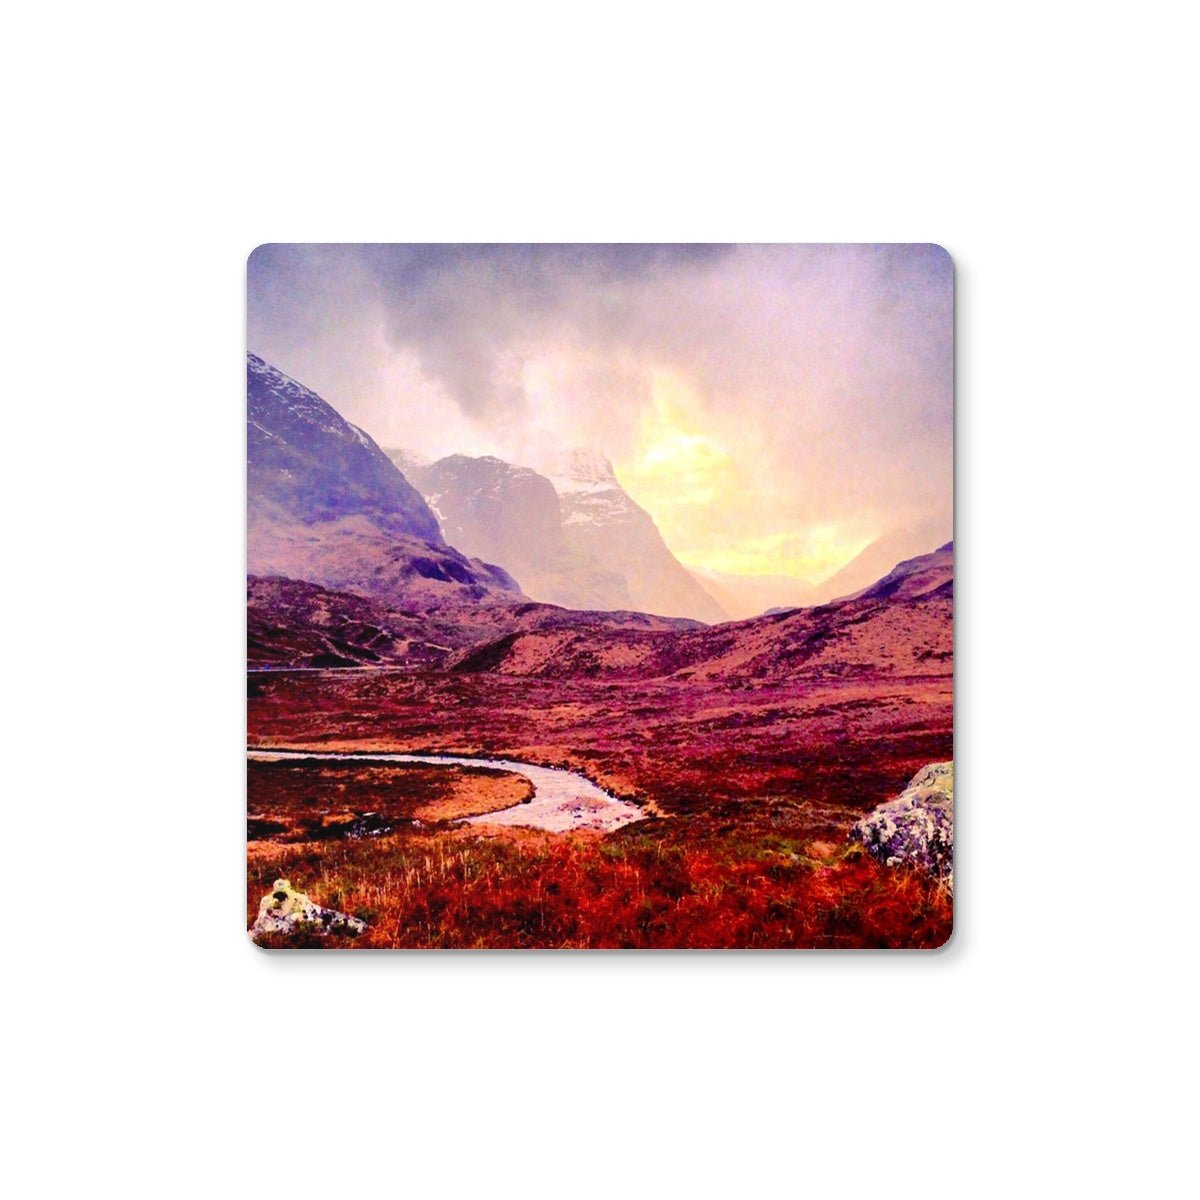 A Brooding Glencoe Art Gifts Coaster-Coasters-Glencoe Art Gallery-6 Coasters-Paintings, Prints, Homeware, Art Gifts From Scotland By Scottish Artist Kevin Hunter